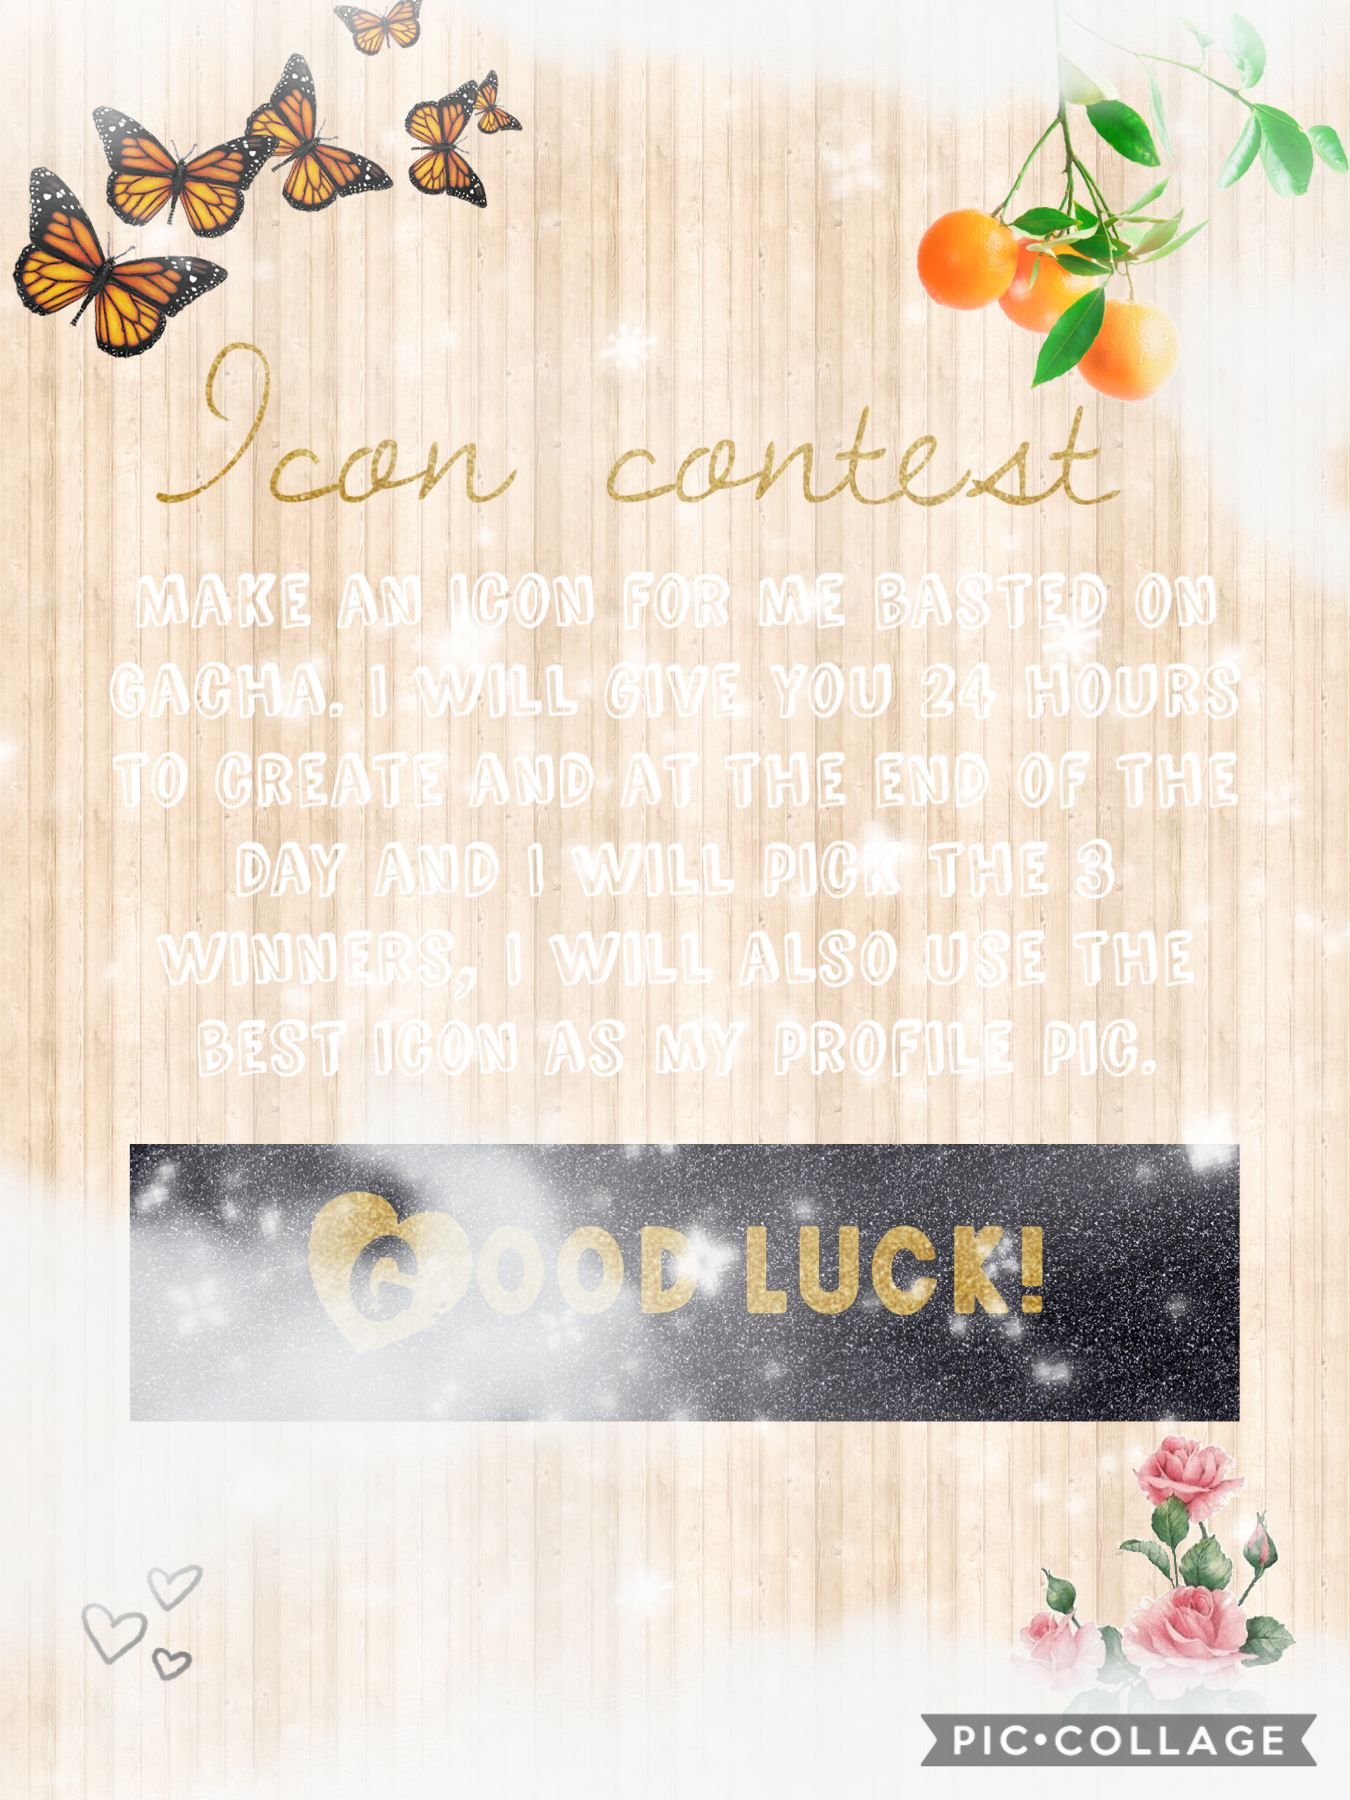 Good luck for the contest!